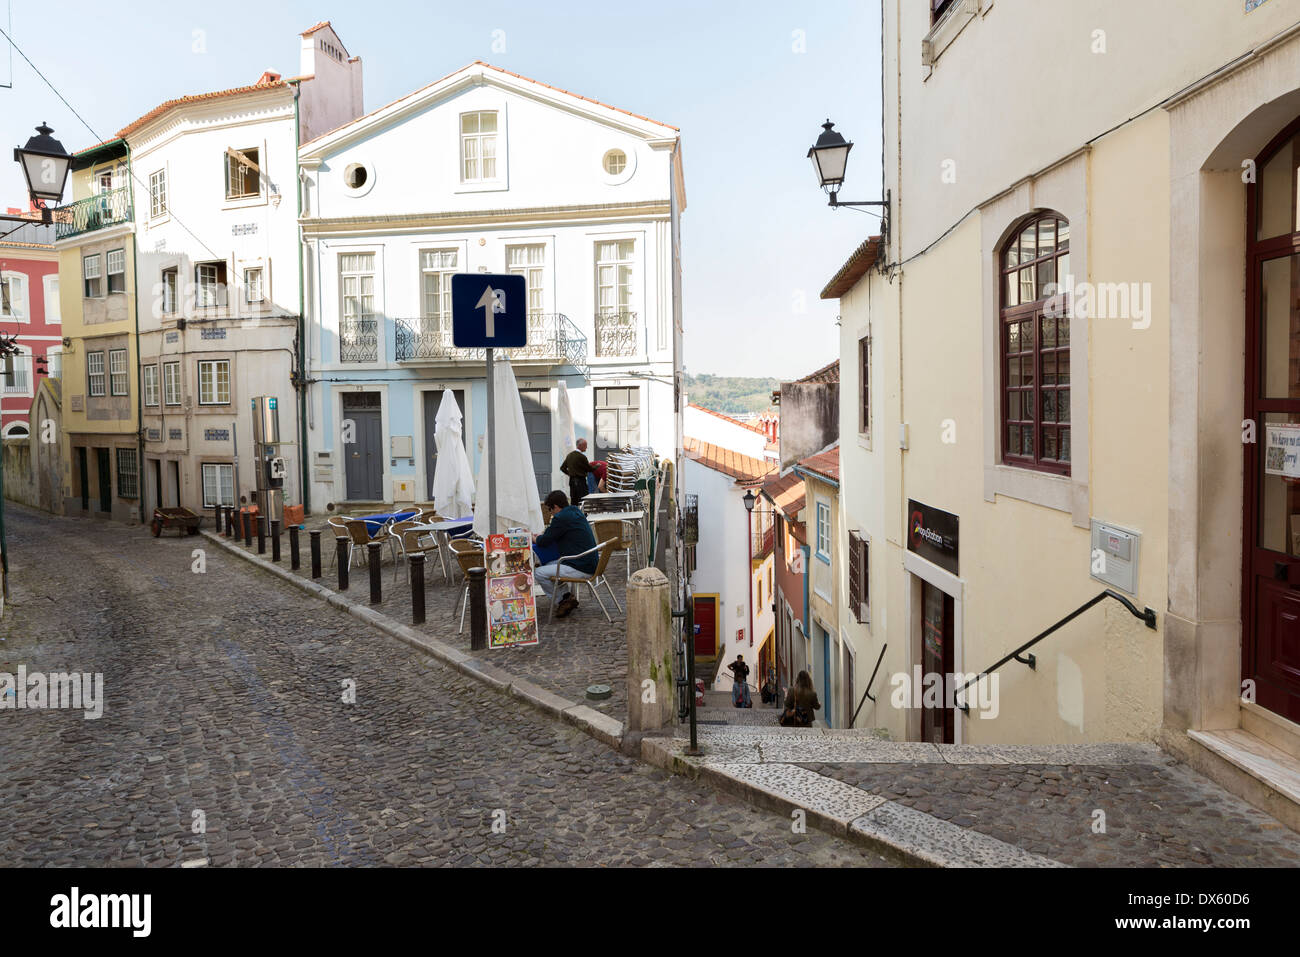 COIMBRA, PORTUGAL - MARCH 13,2014: Narrow Street with ancient houses in Old Town, Coimbra, Portugal Stock Photo